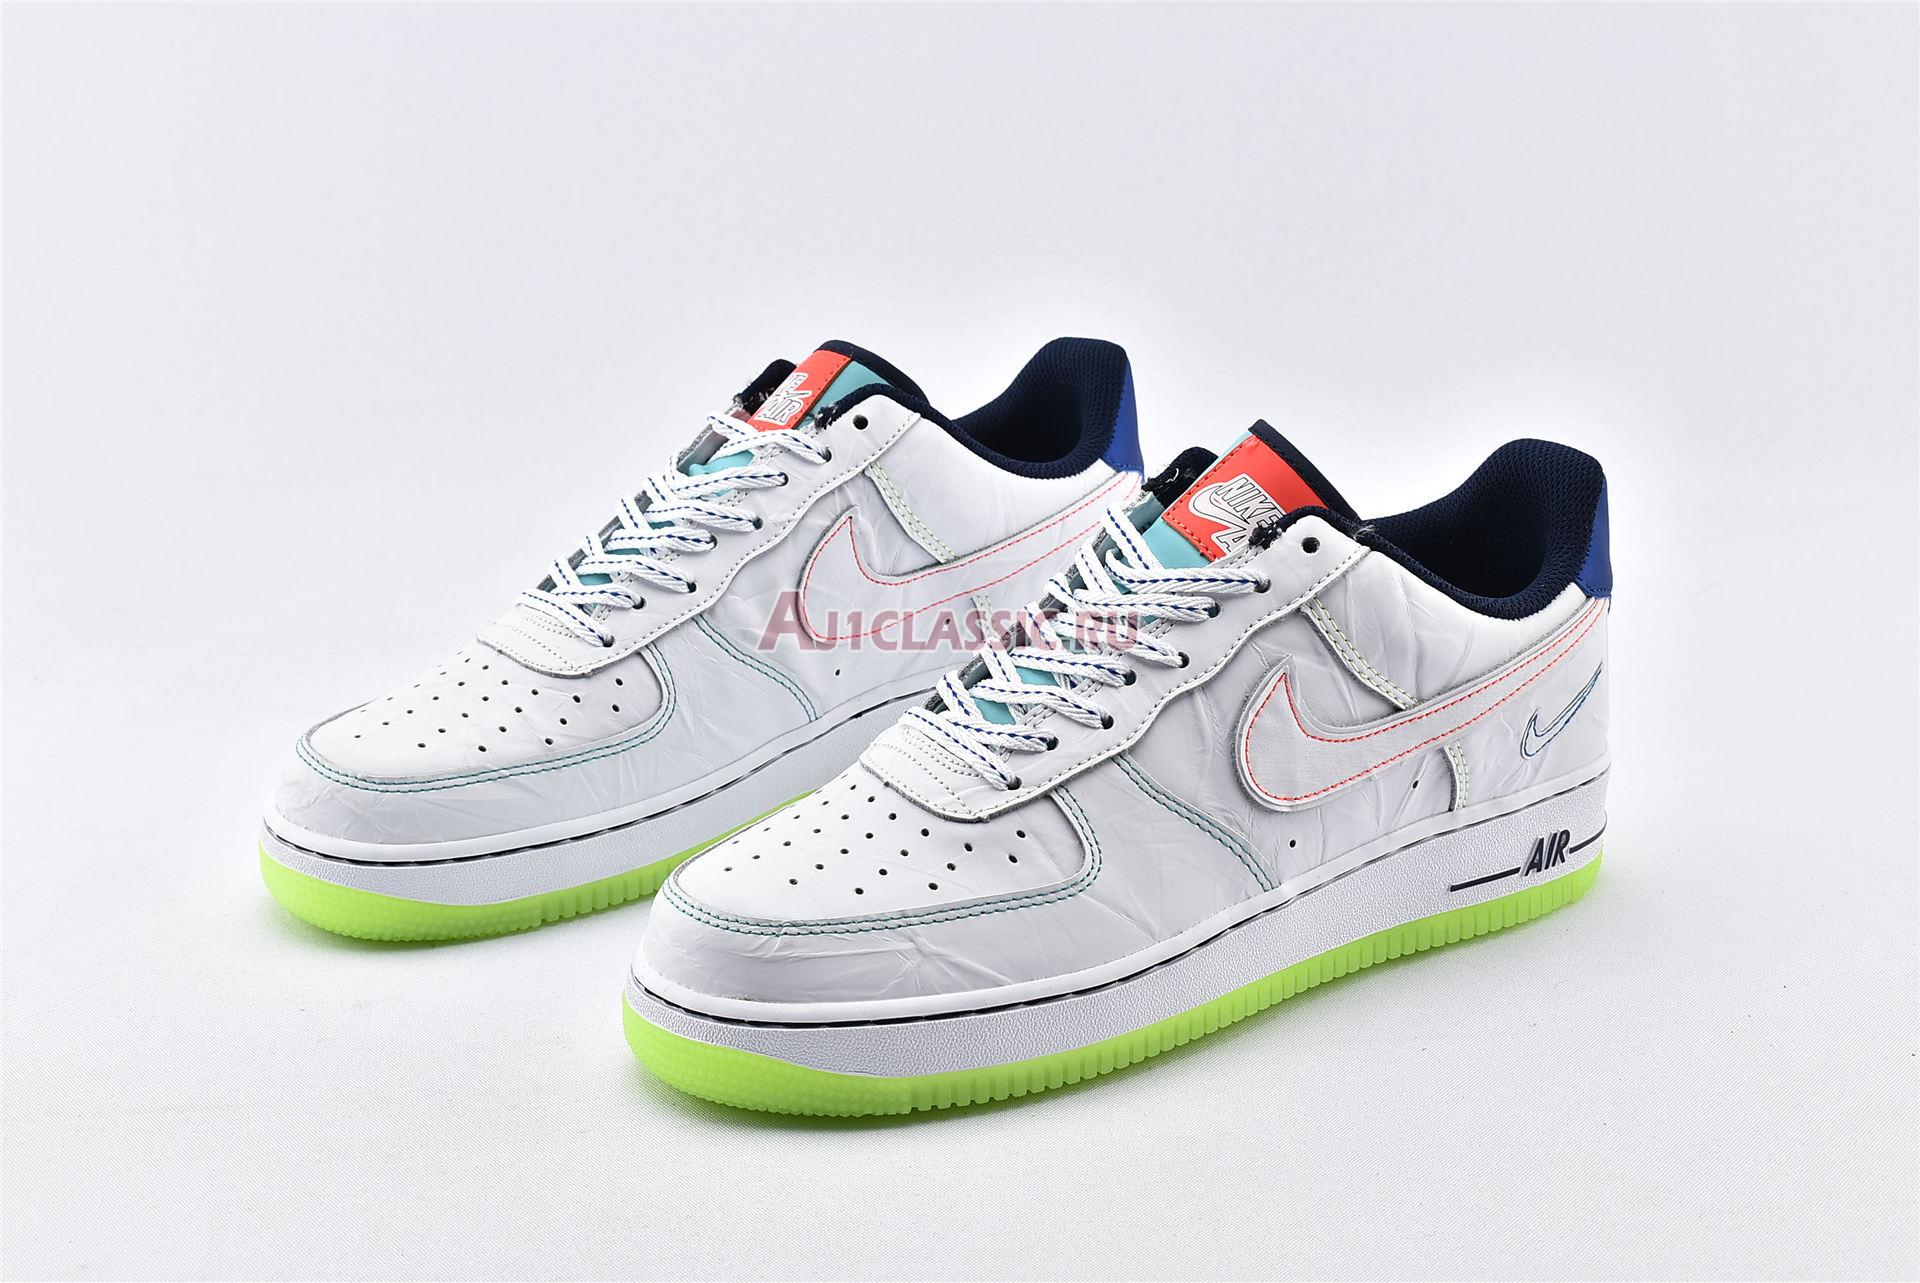 Nike Air Force 1 Low BG "Outside the Lines" CV2421-100